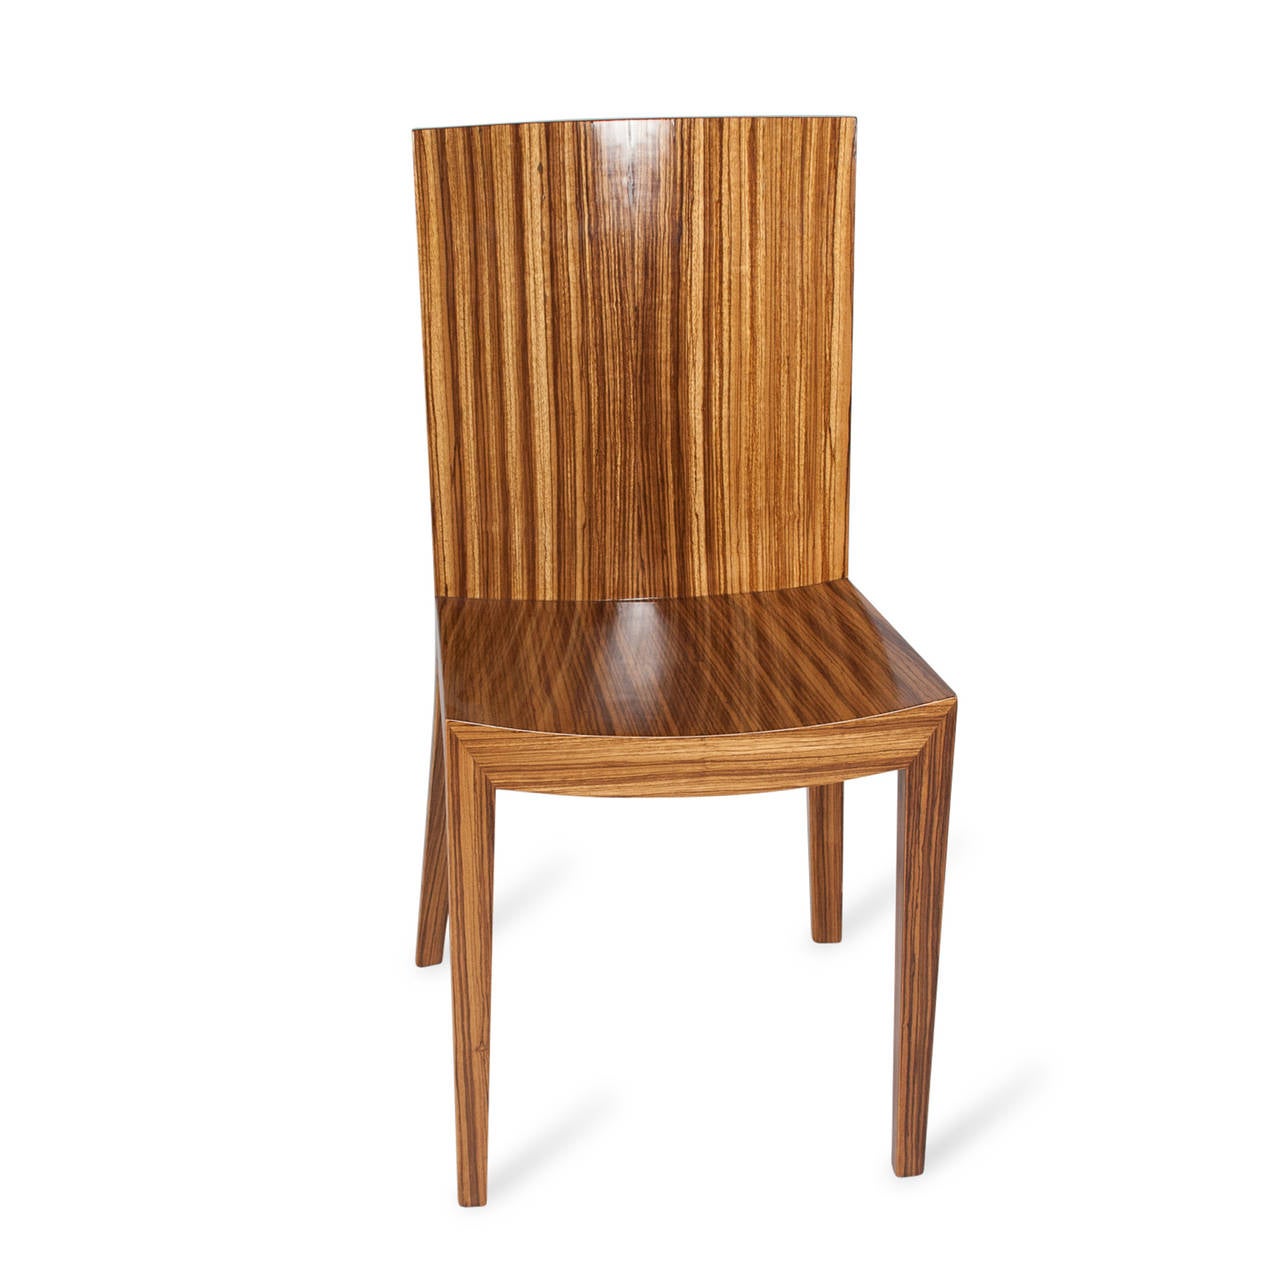 Zebrawood side chair, curved back and slightly curved seat, on tapered legs, by Karl Springer, American, 1970s. Measures: 18 ½” W, 16 ¾” D, 18 ½” SH, 35” H.

 